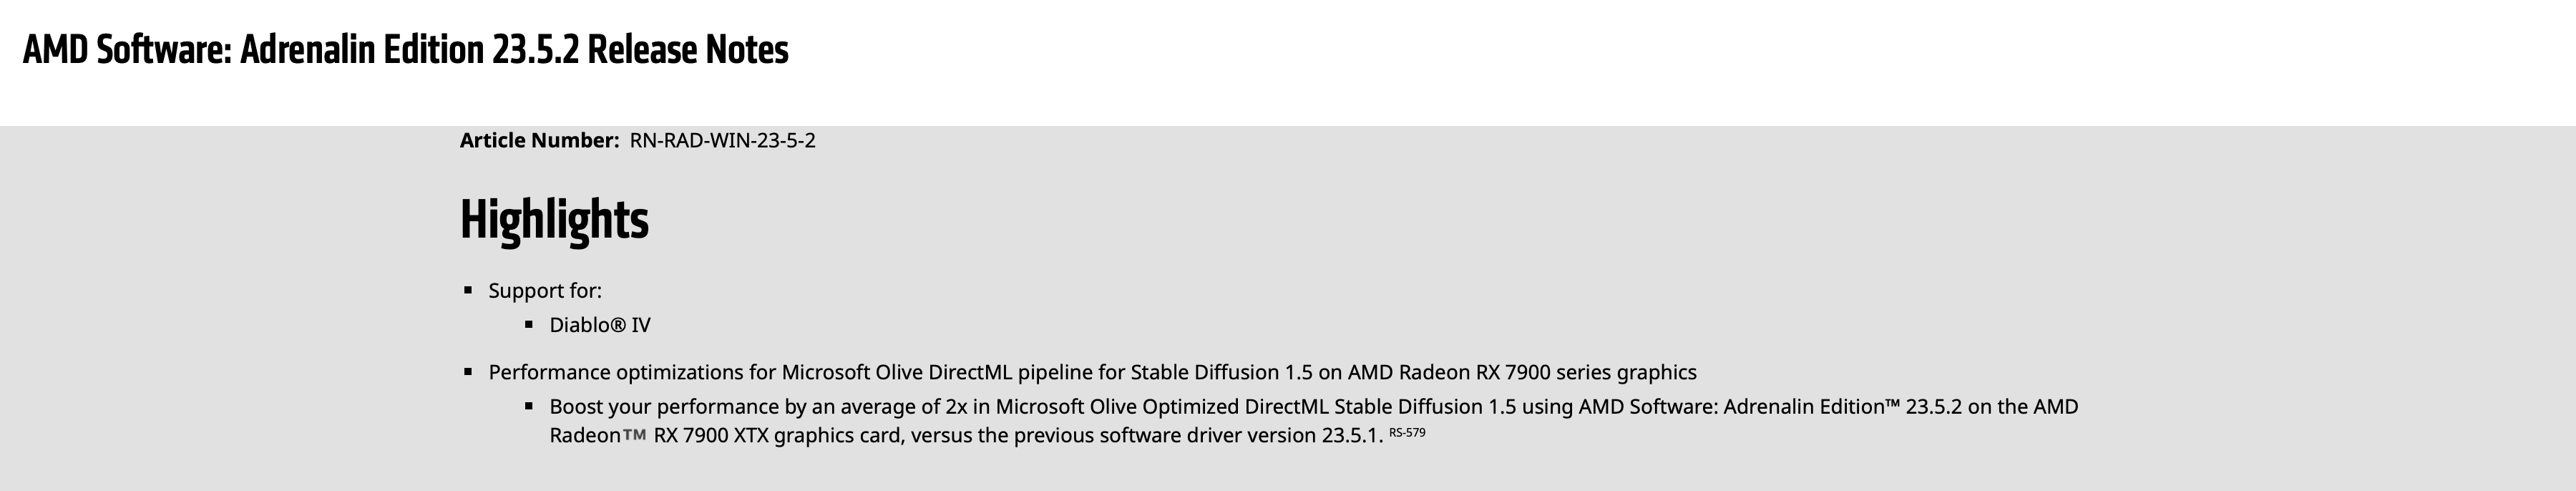 New AMD Graphics Driver Adds Support for Diablo 4 - Icy Veins